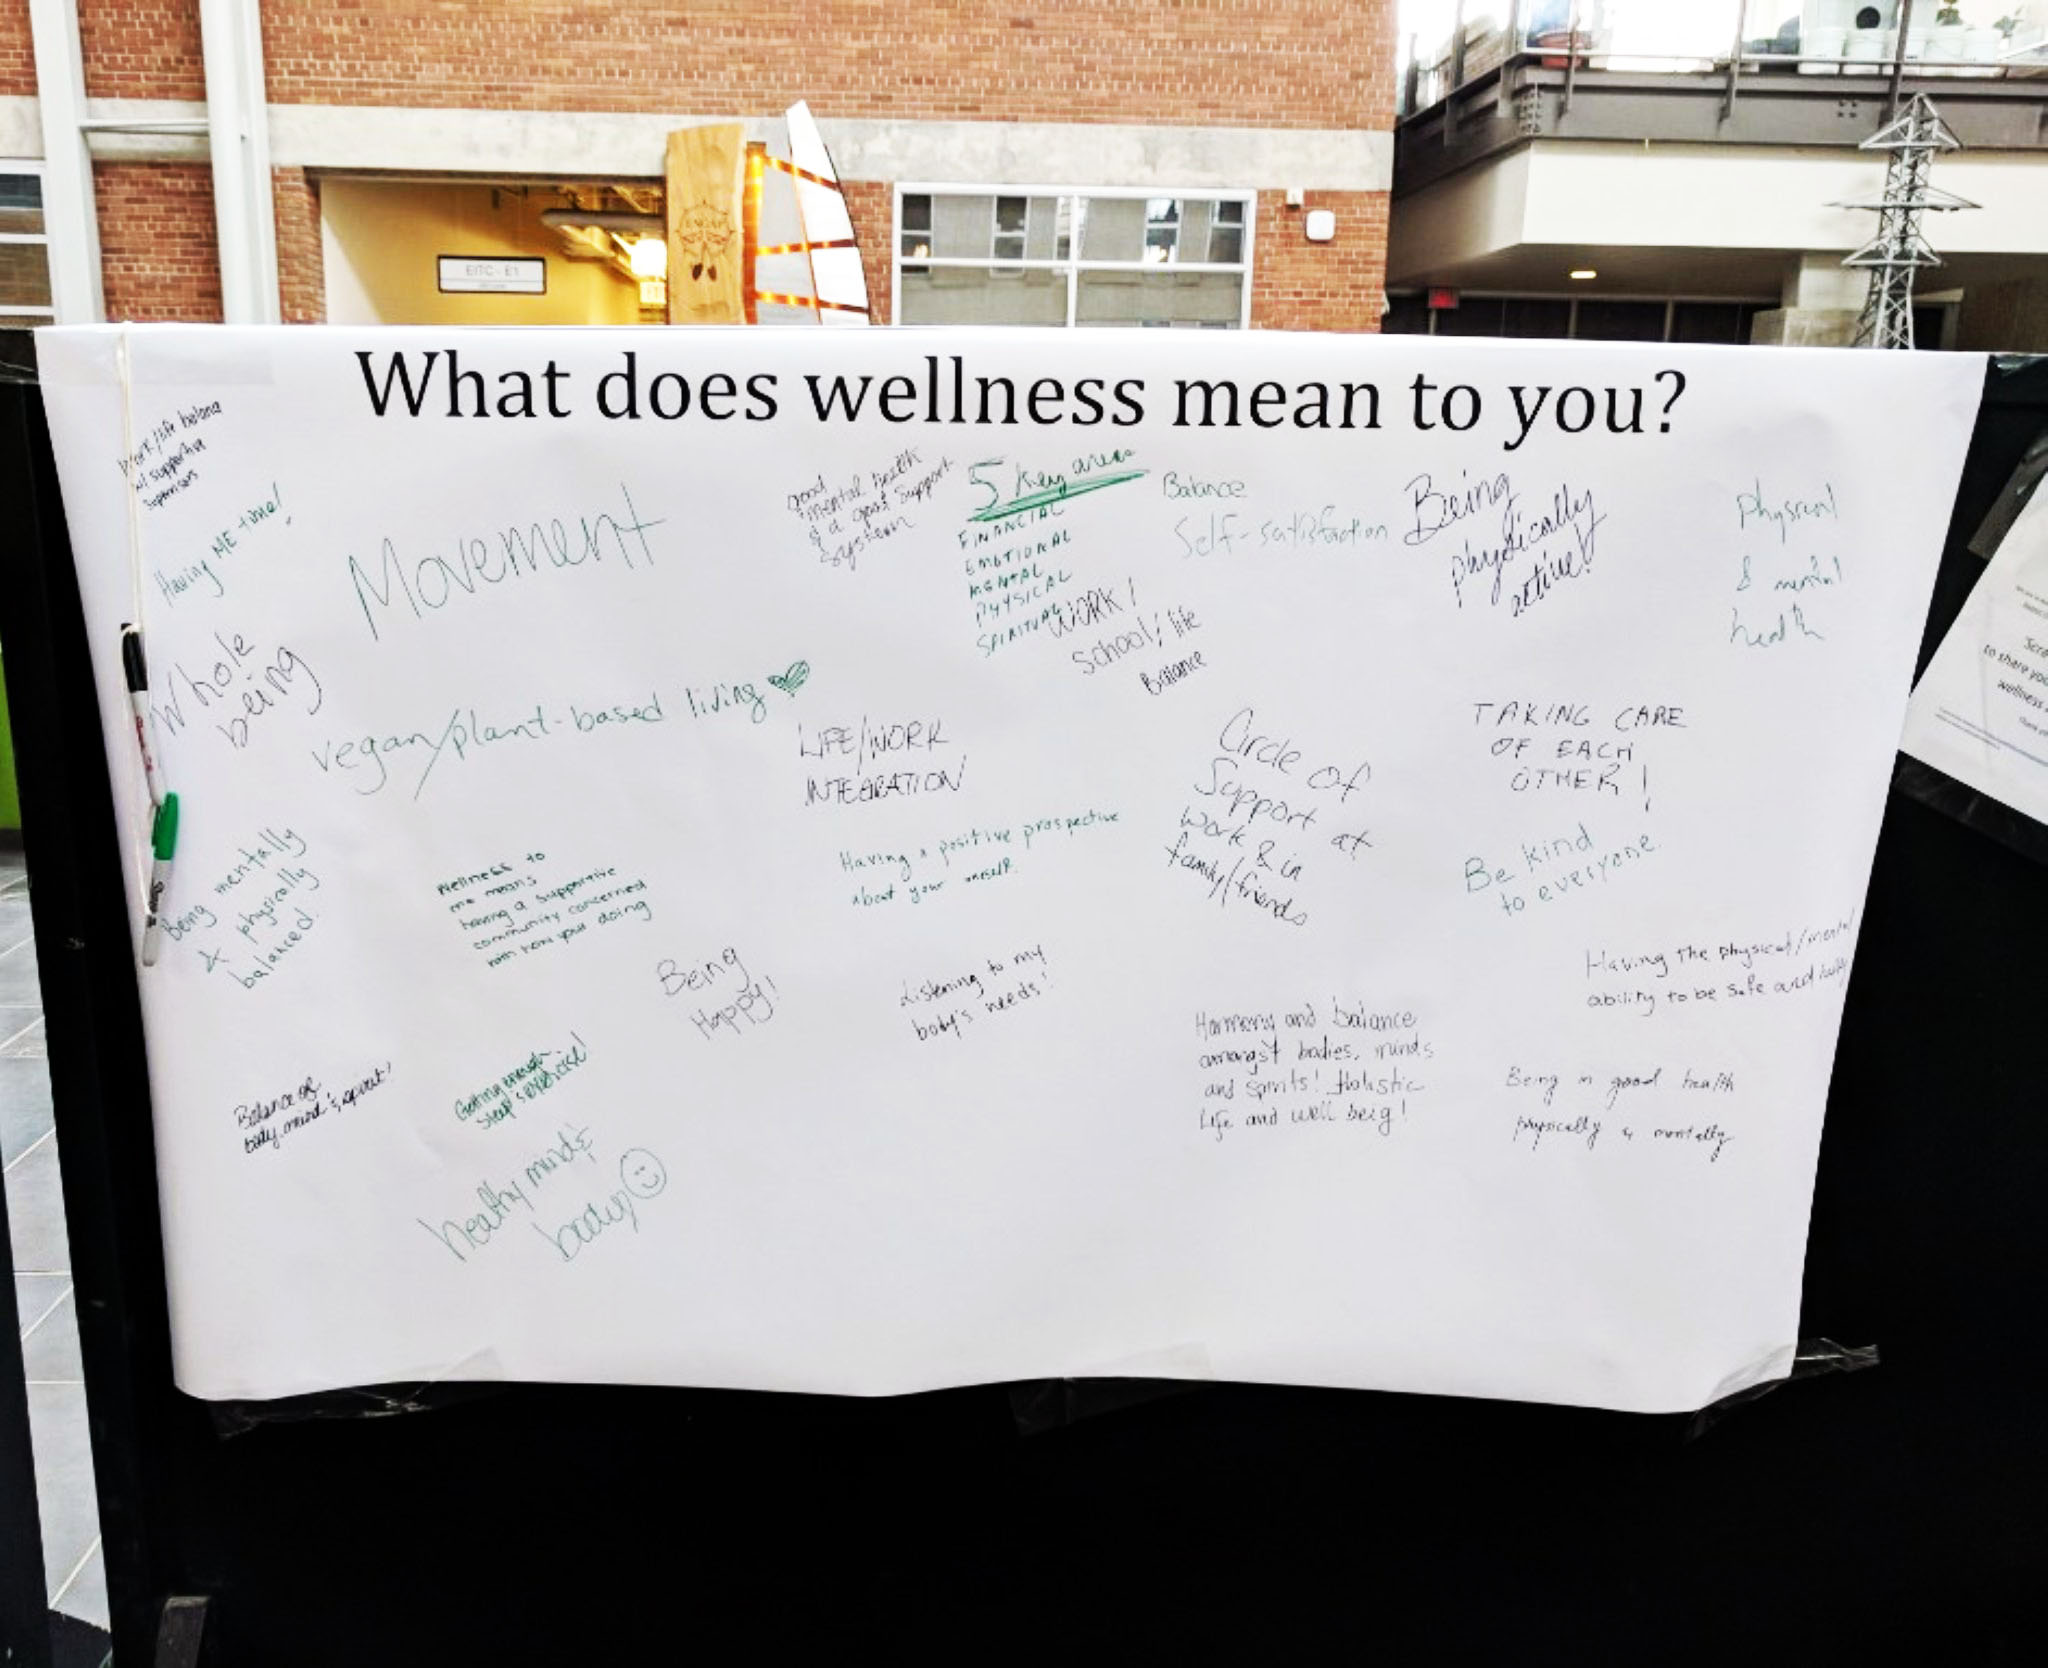 What does wellness mean to you?